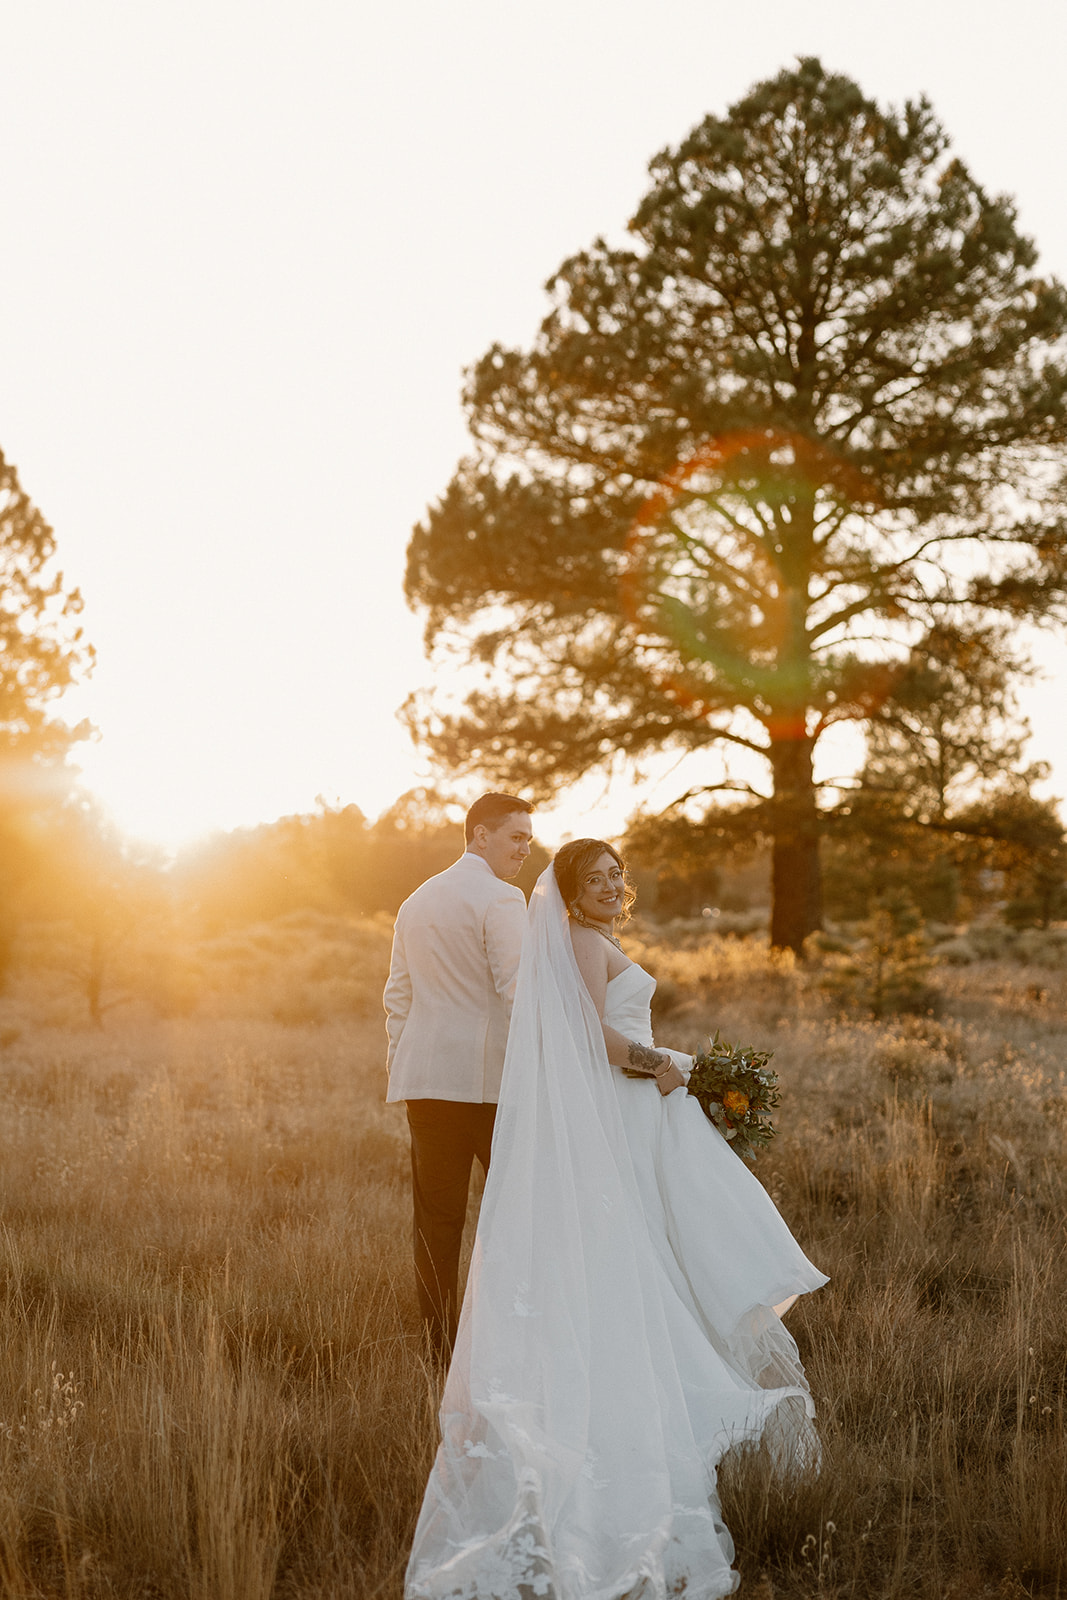 Stunning bride and groom pose together at golden hour after their dreamy Arizona wedding